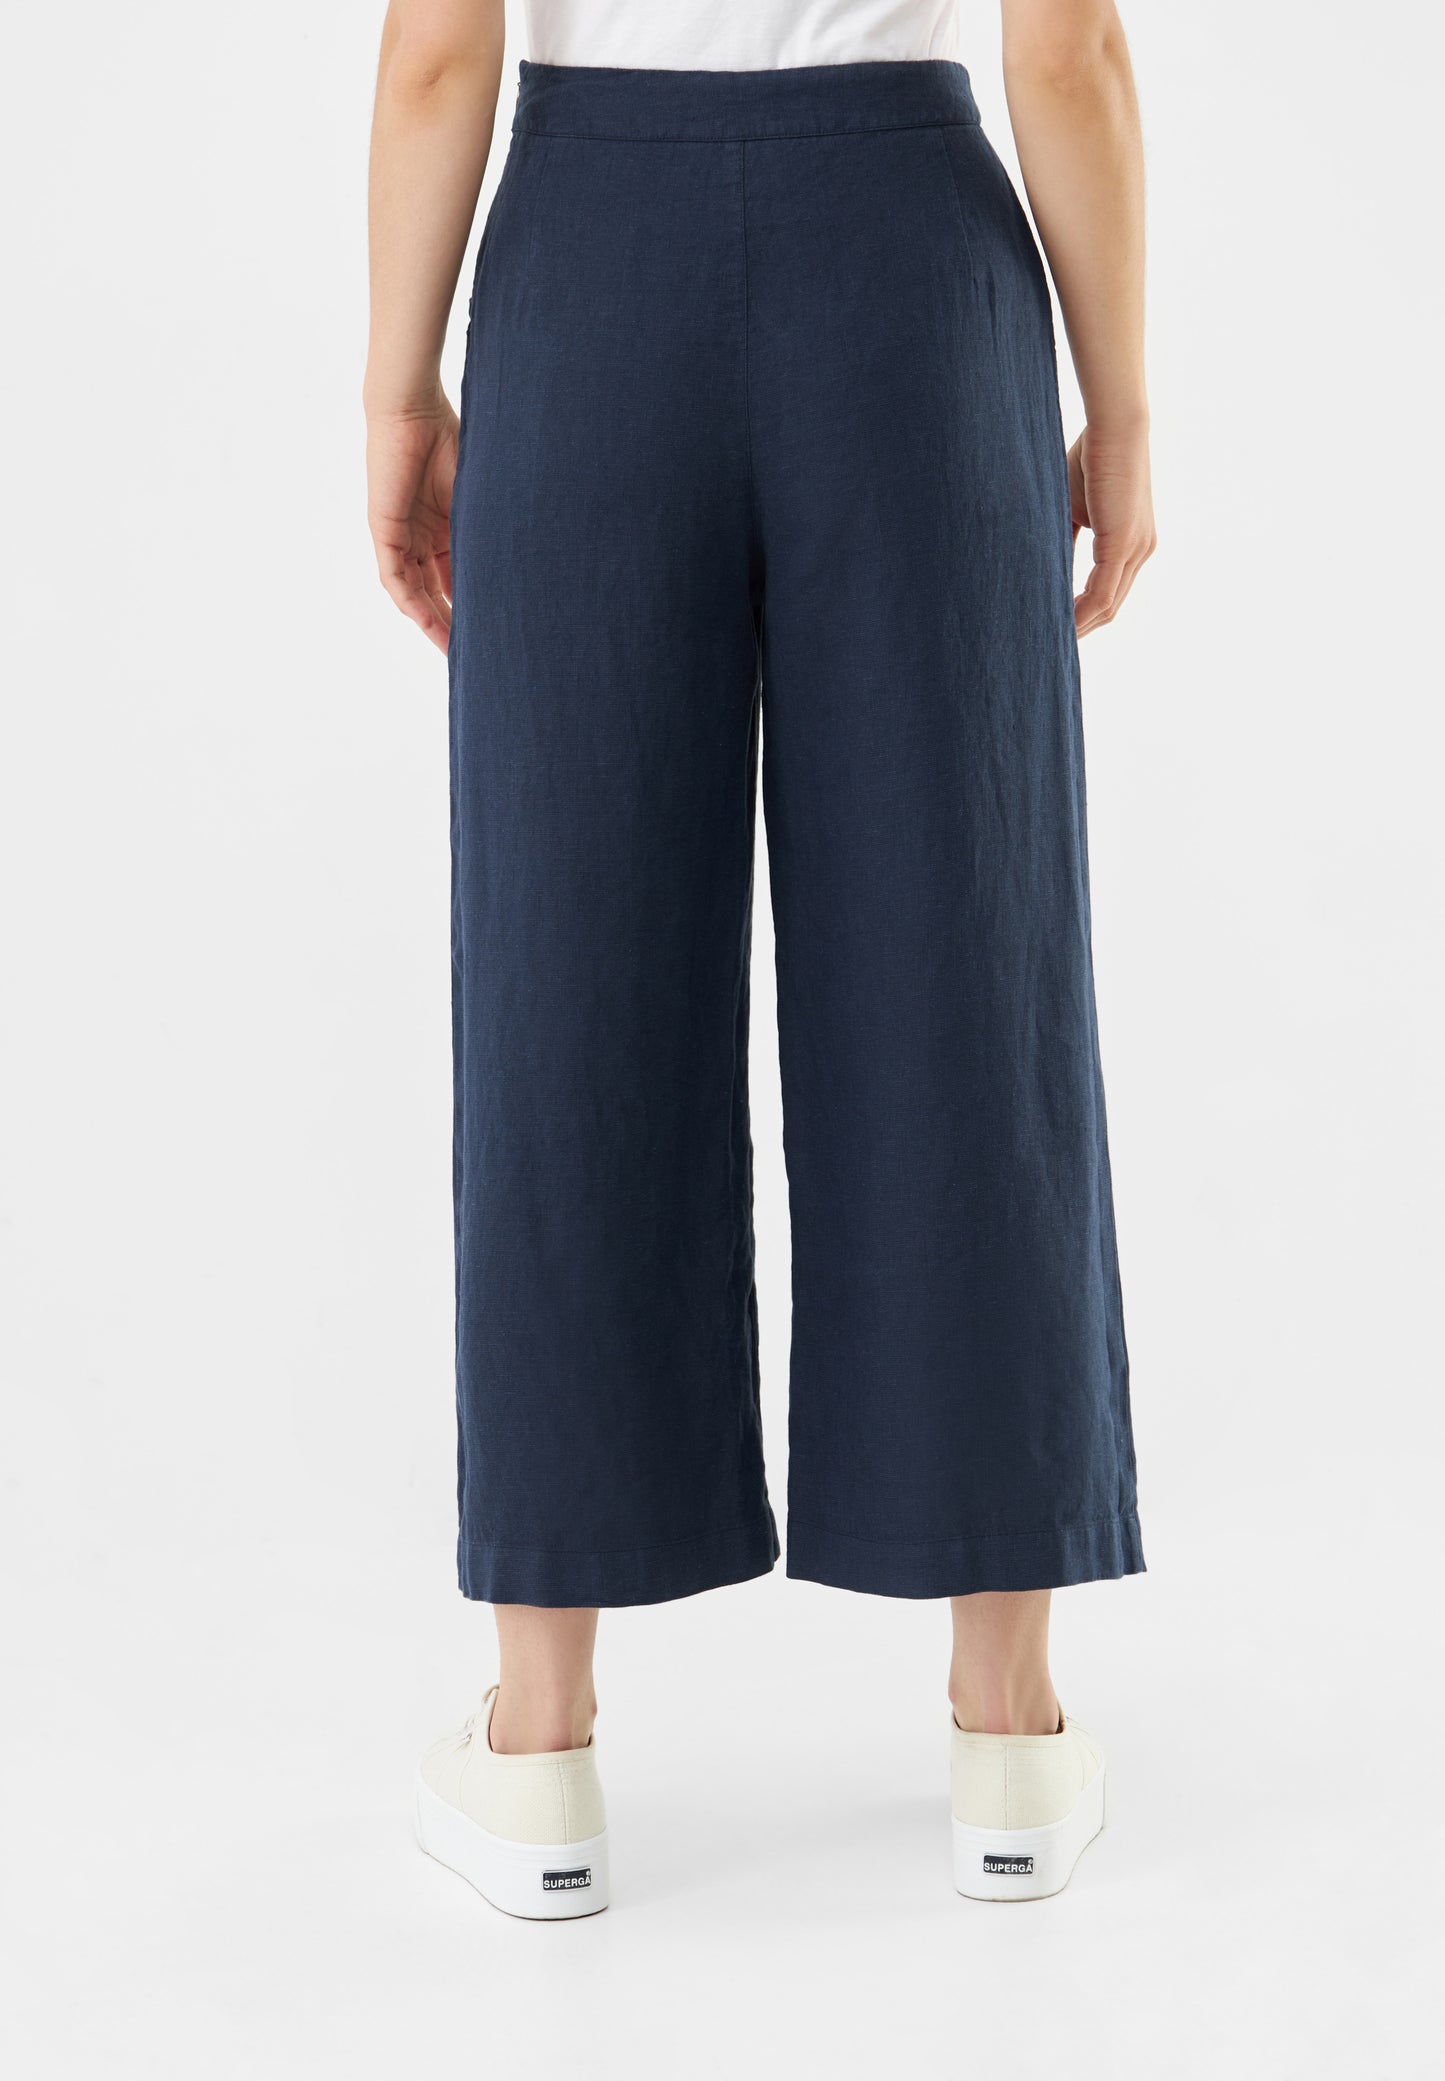 Givn - Fay Trousers Midnight Blue (Linen)